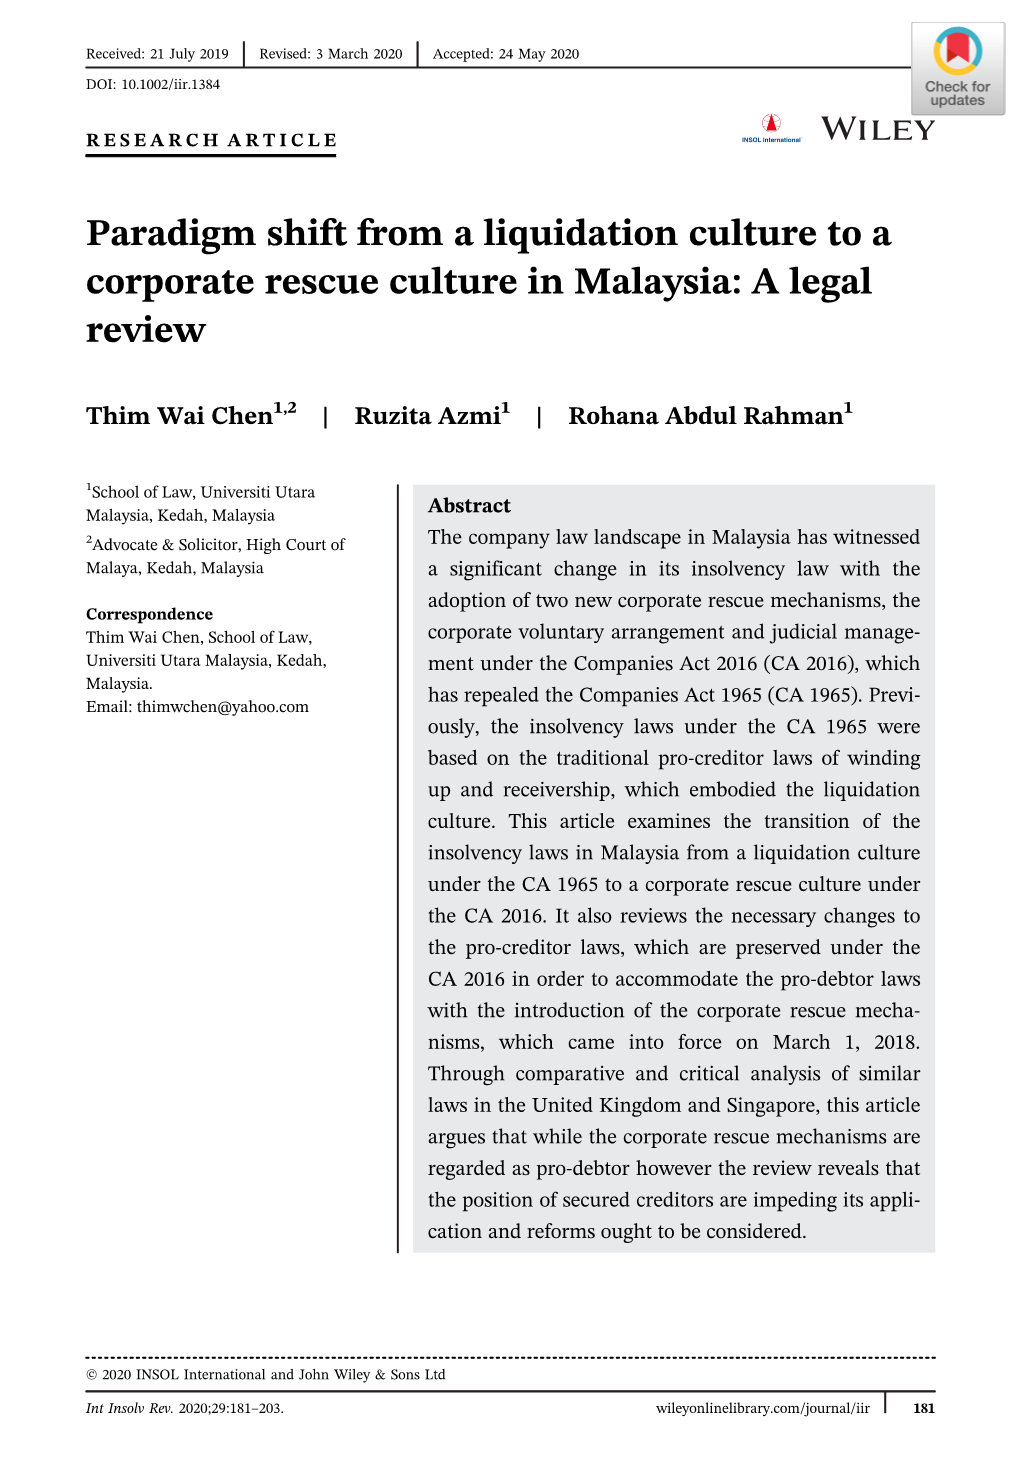 Paradigm Shift from a Liquidation Culture to a Corporate Rescue Culture in Malaysia: a Legal Review